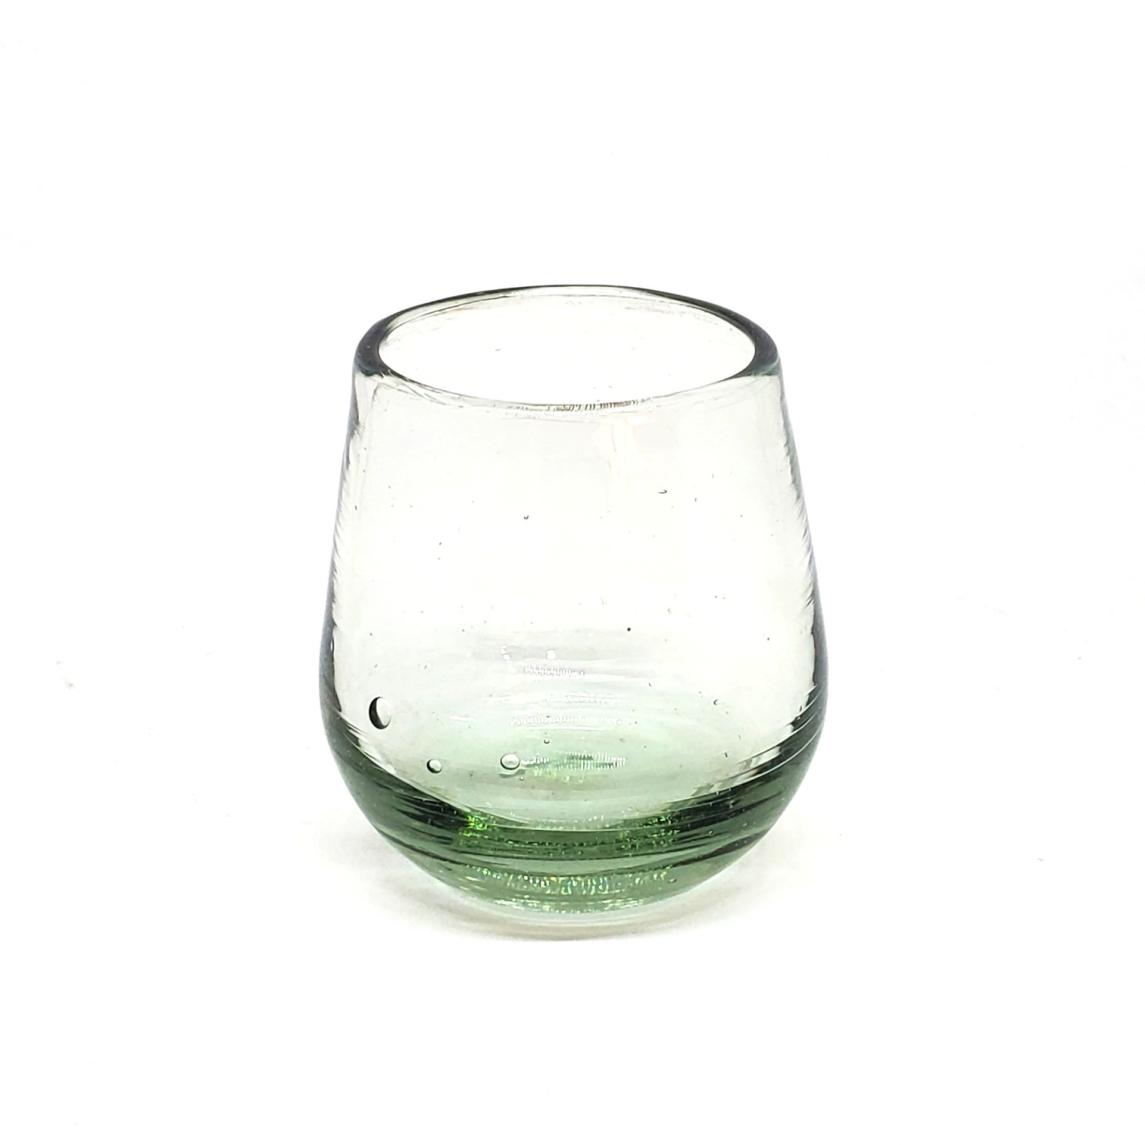 Sale Items / Clear 6 oz Roly Poly Glasses  / Our Clear Blown Glasses are individually handcrafted from recycled glass, making each of them unique works of art.